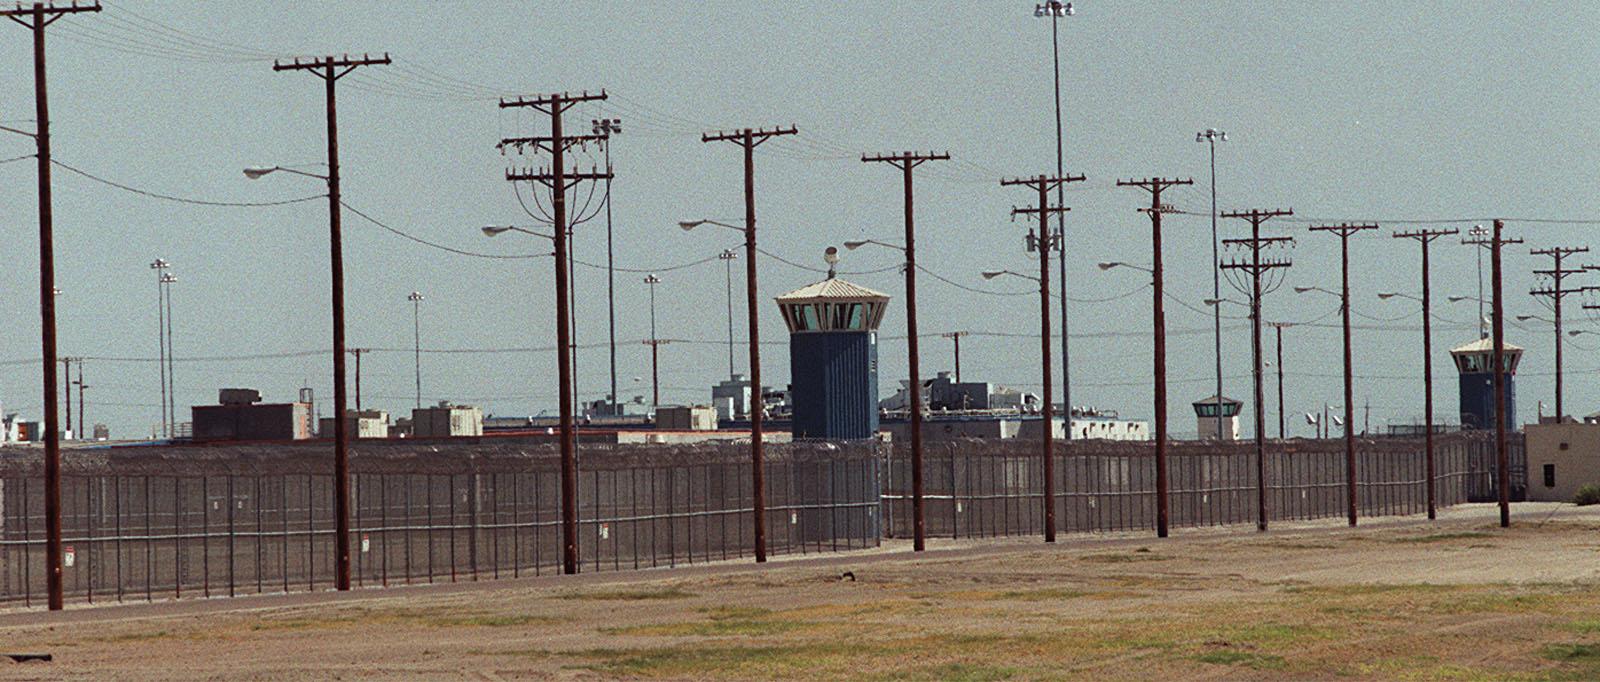 Robert Downey Jr. was released on August 2, 2000 from this correctional facility, Corcoran State Prison, in Corcoran, California, where he was housed at the California Substance Abuse Treatment Facility | Source: Getty Images